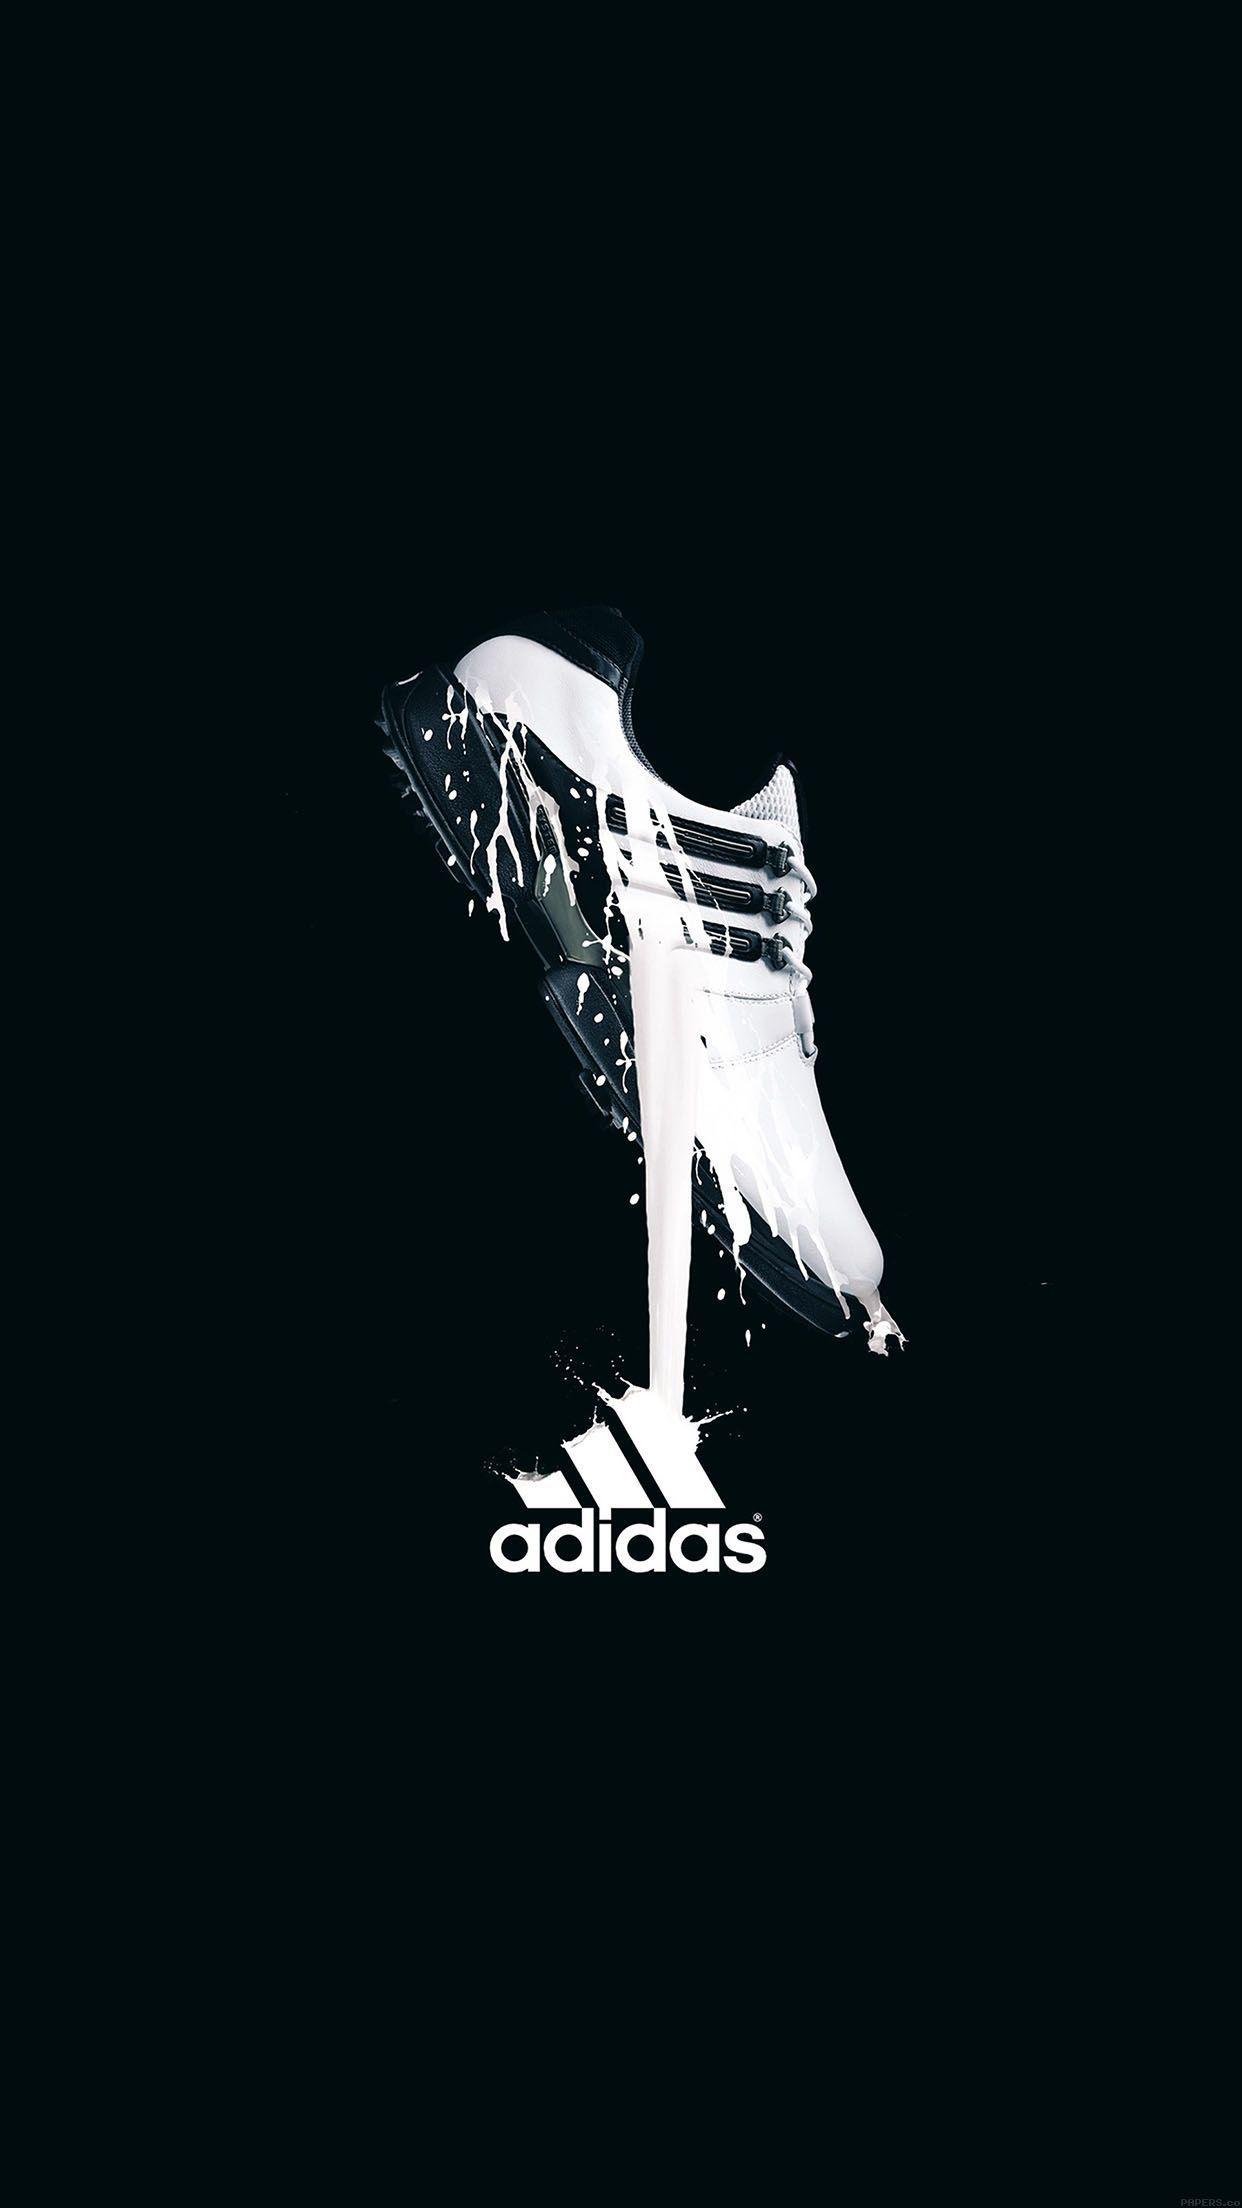 adidas logo for iphone